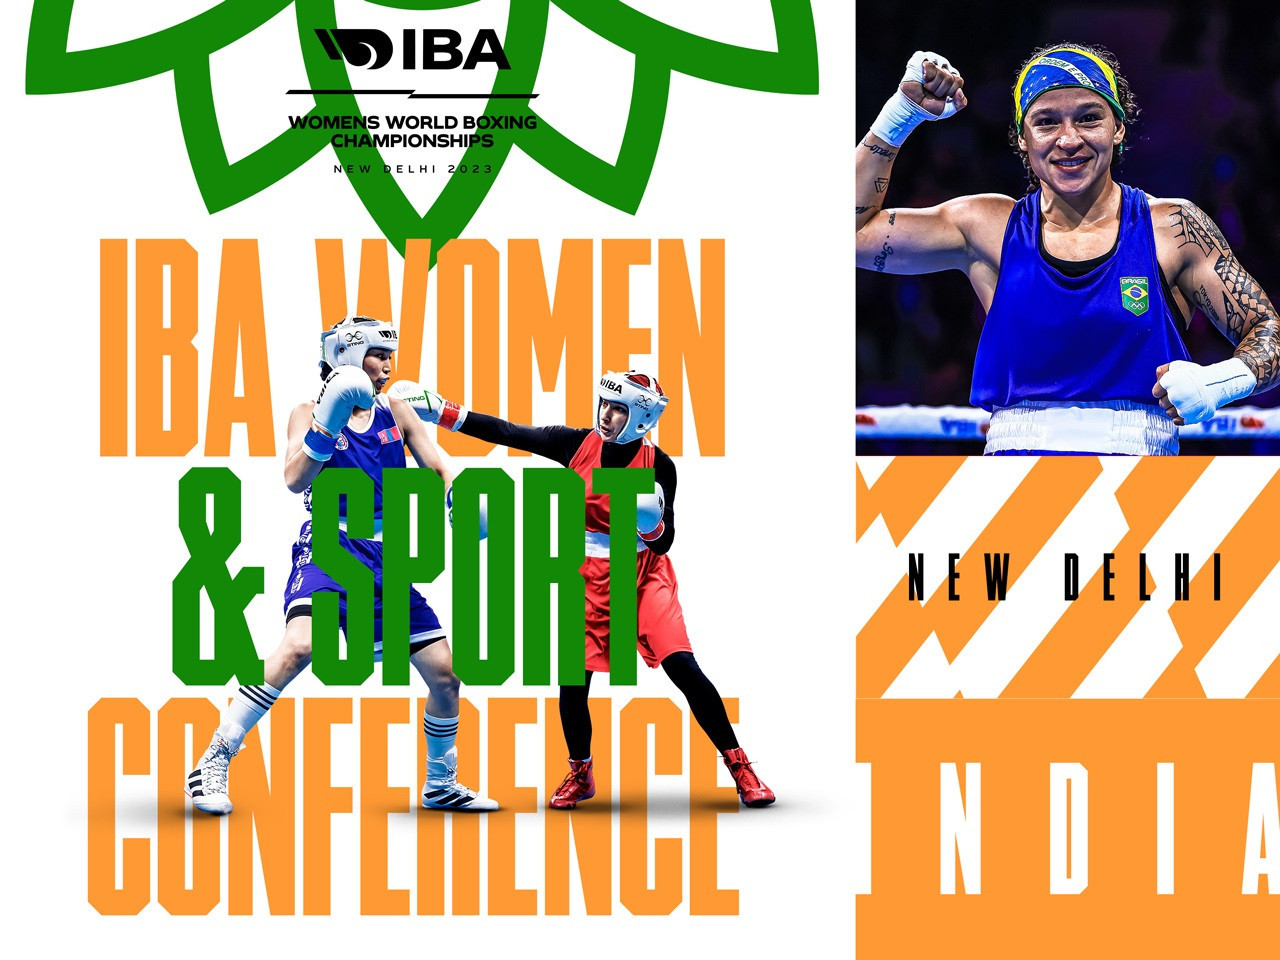 The IBA Women and Sport Conference is due to be staged before the final two days of the Women's World Boxing Championships in New Delhi ©IBA